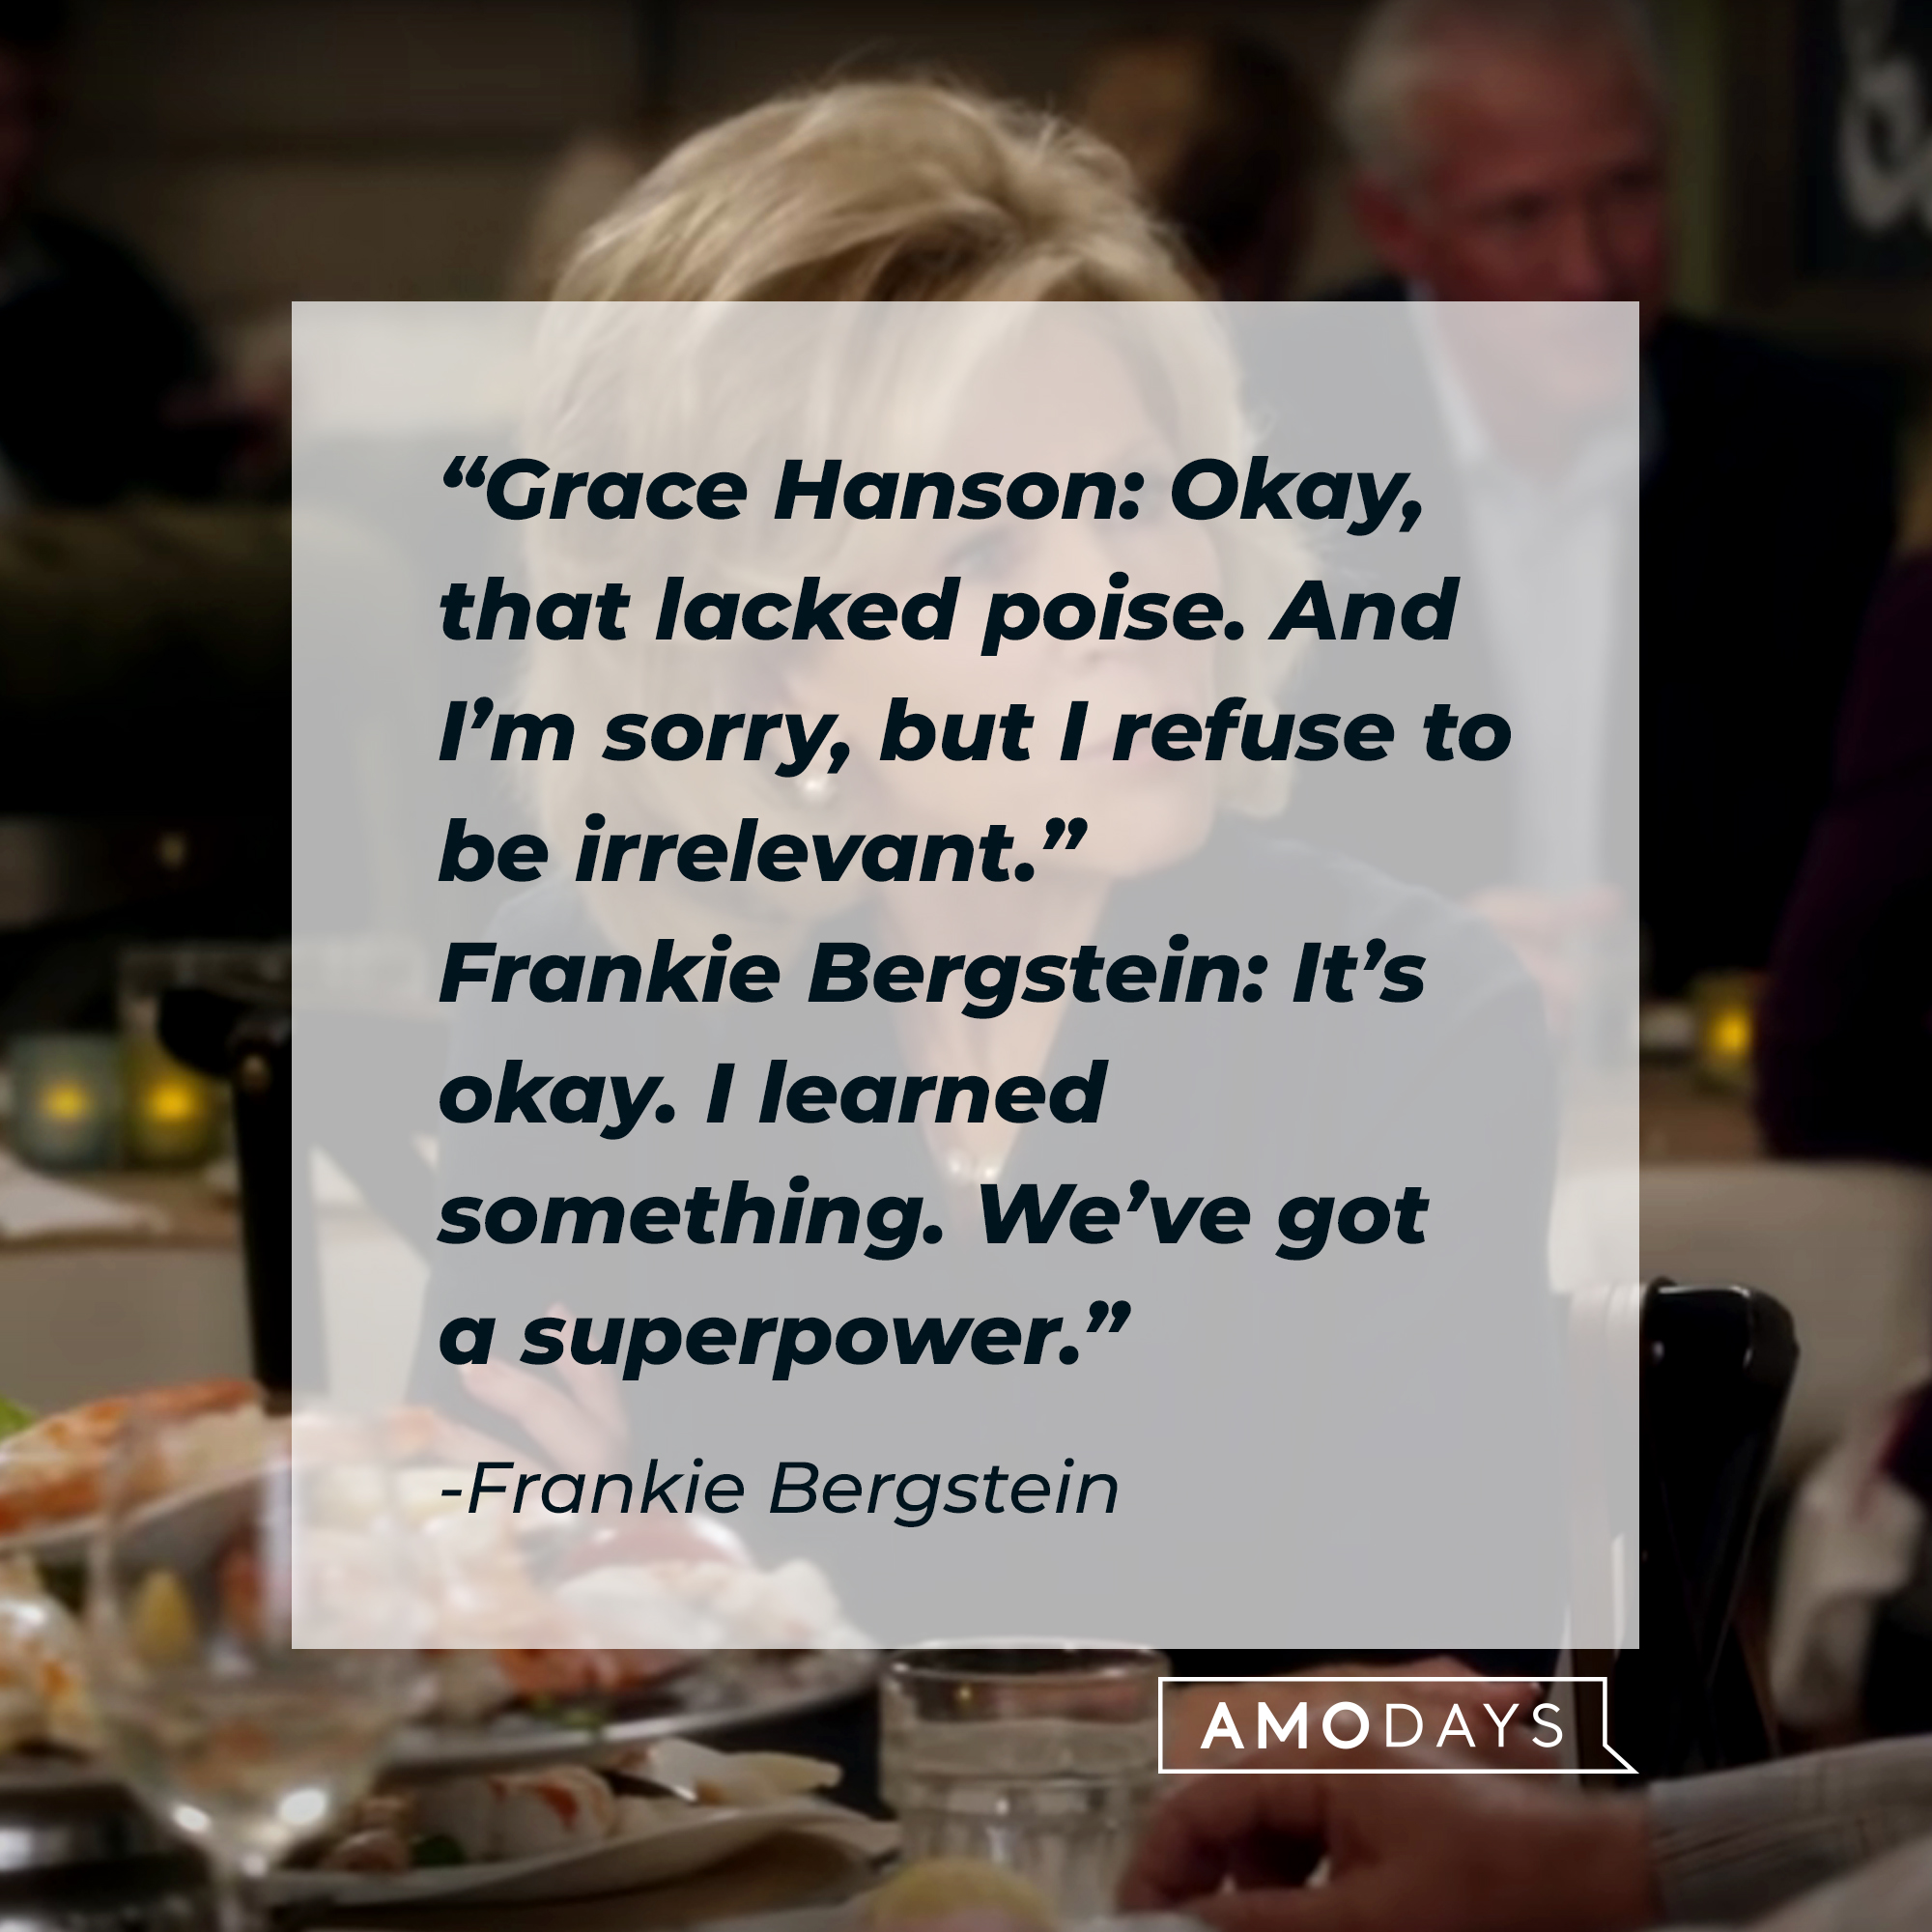 Frankie Bergstein's quote: "Grace Hanson: Okay, that lacked poise. And I’m sorry, but I refuse to be irrelevant. Frankie Bergstein: It’s okay. I learned something. We’ve got a superpower.” | Source: youtube.com/Netflix